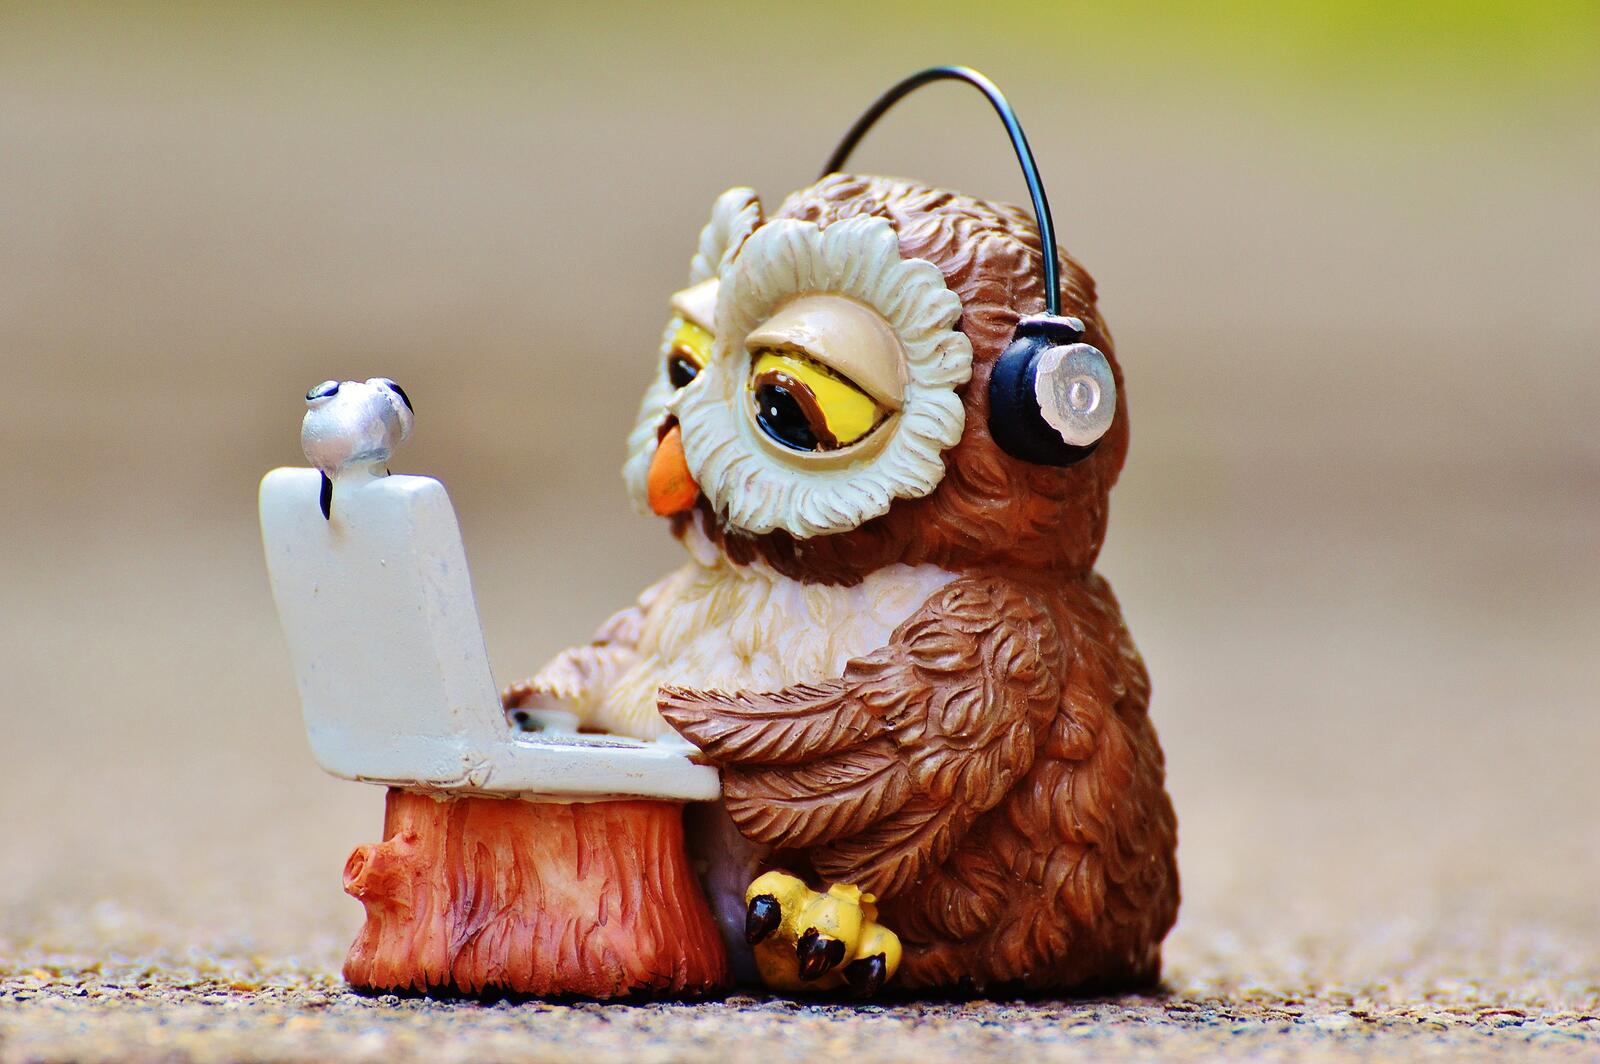 Free photo An owl wearing headphones listens to music on a laptop